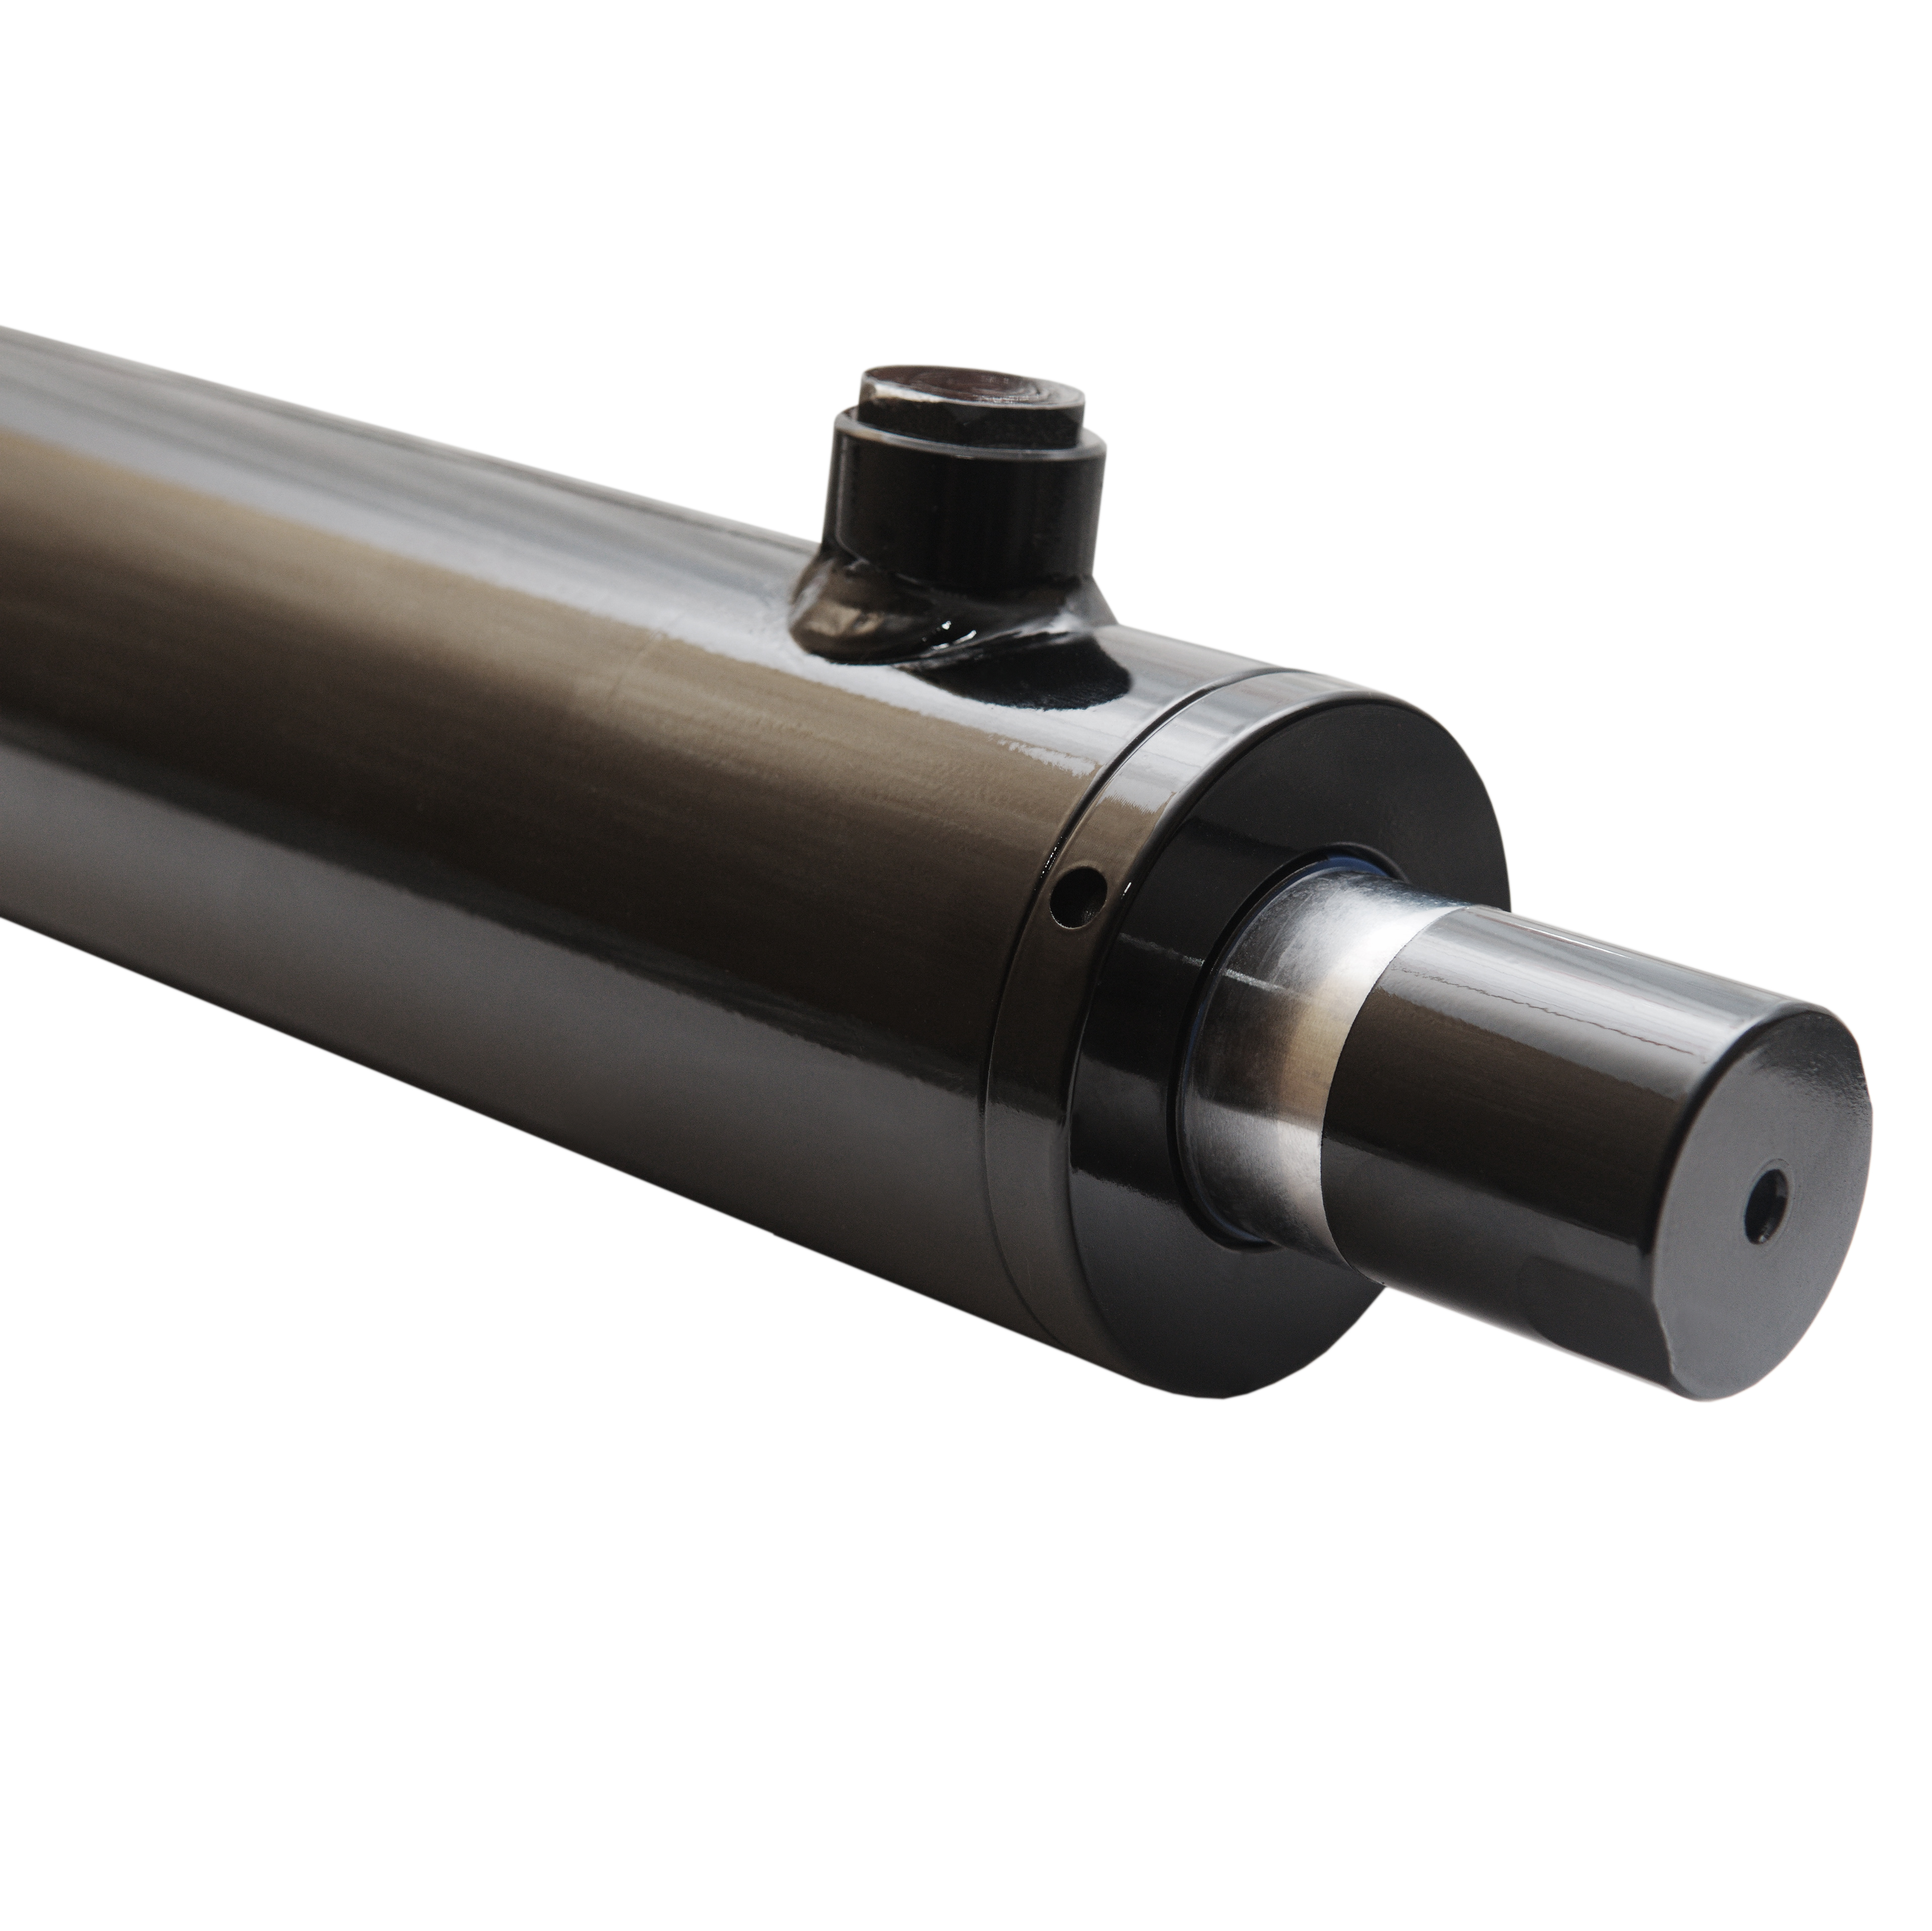 2.5 bore x 11 stroke hydraulic cylinder, welded universal double acting cylinder | Magister Hydraulics